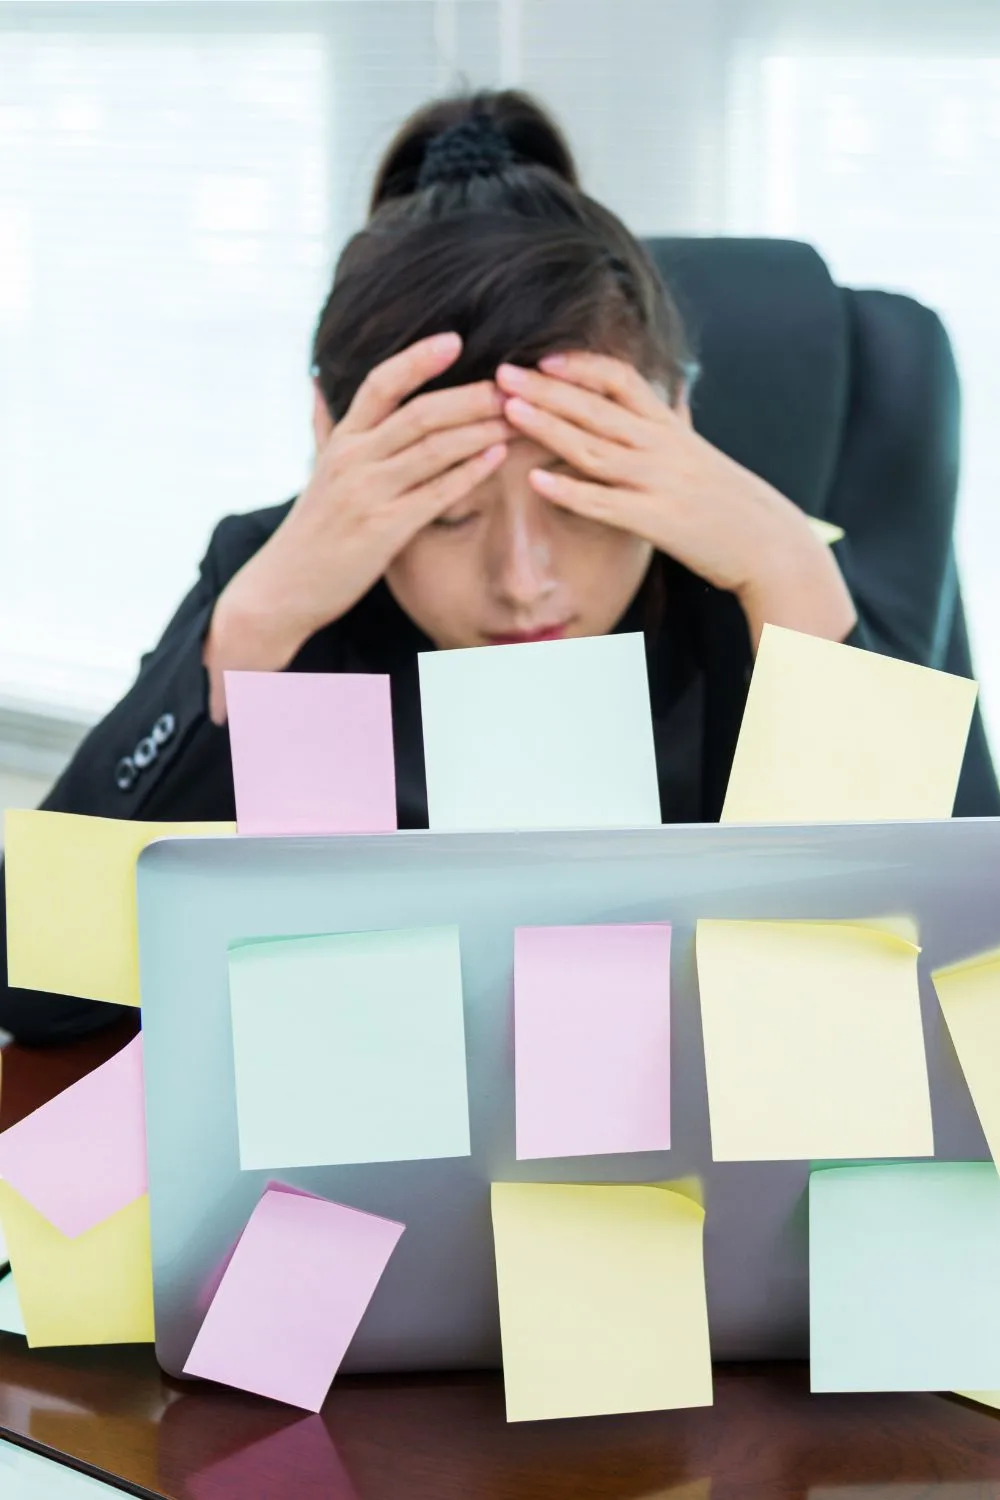 Signs You Should Quit Your Job Immediately